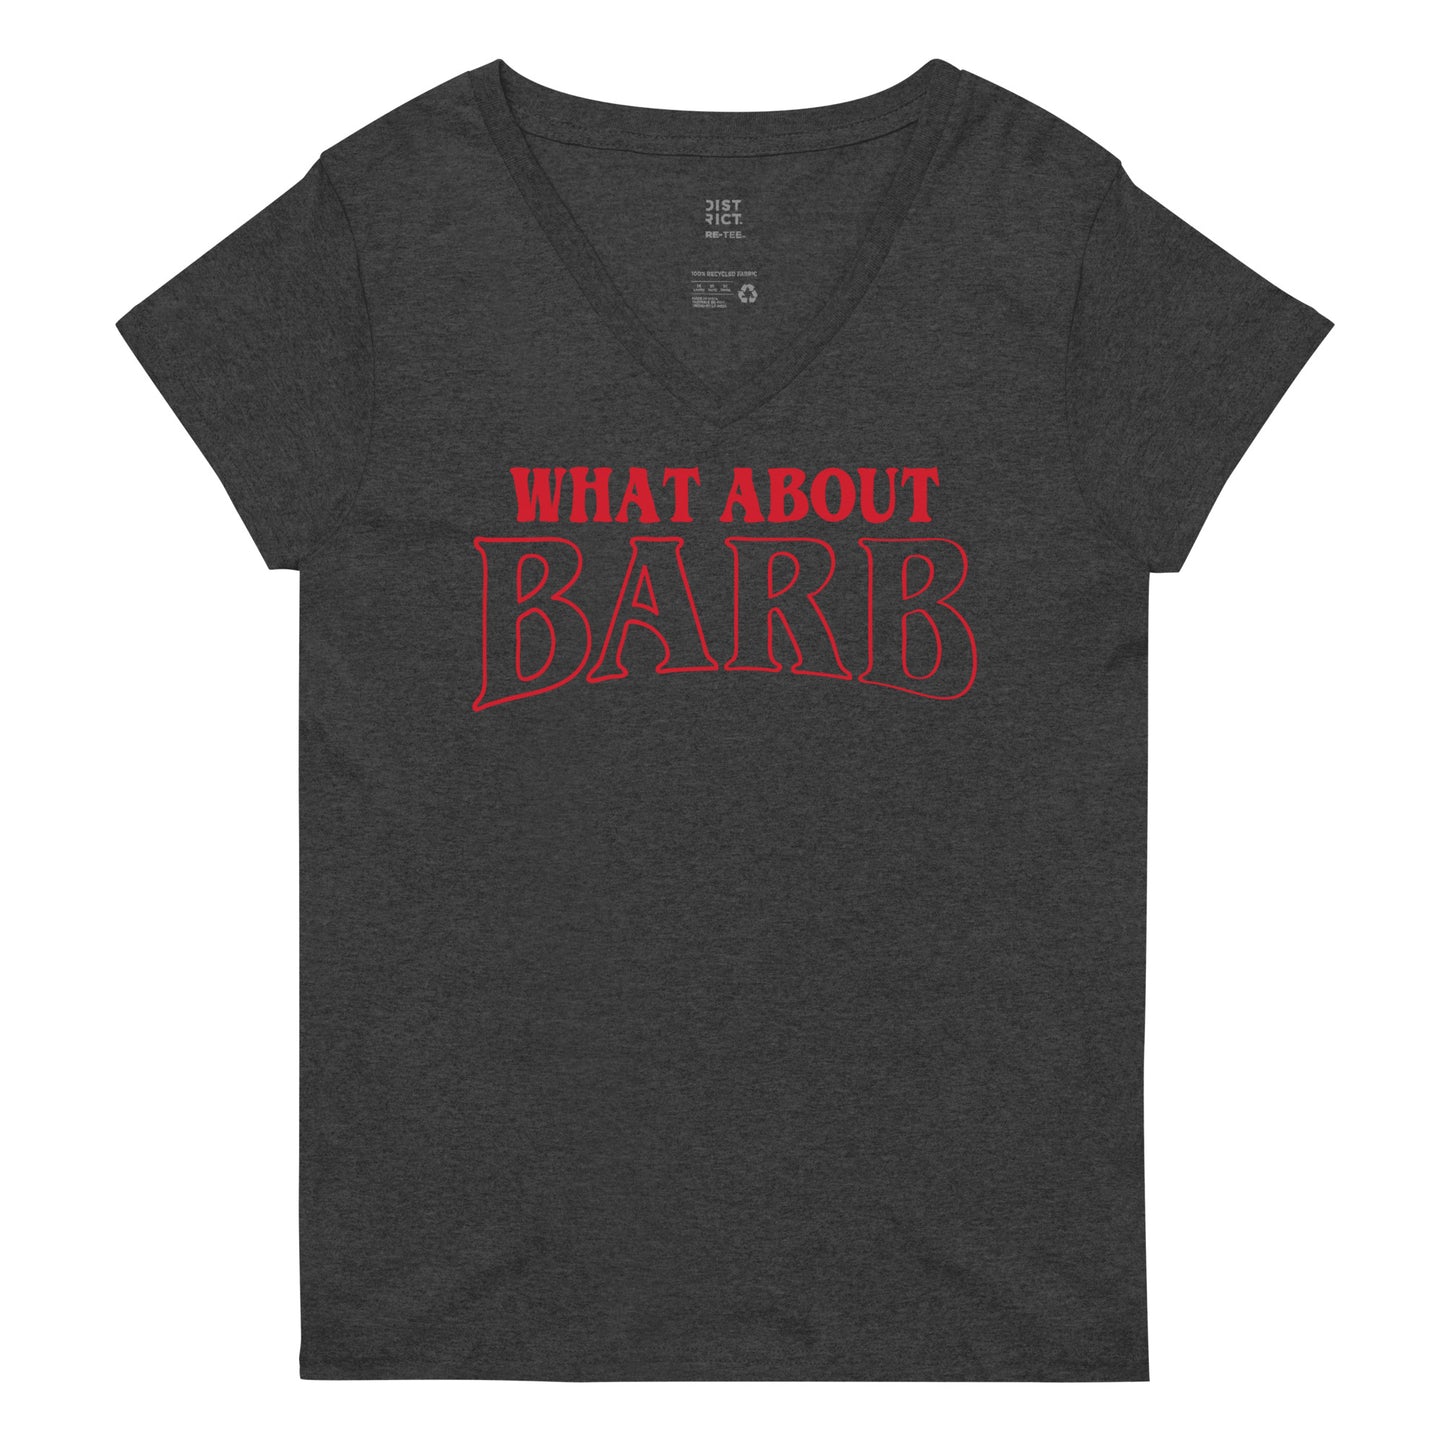 What About Barb? Women's V-Neck Tee